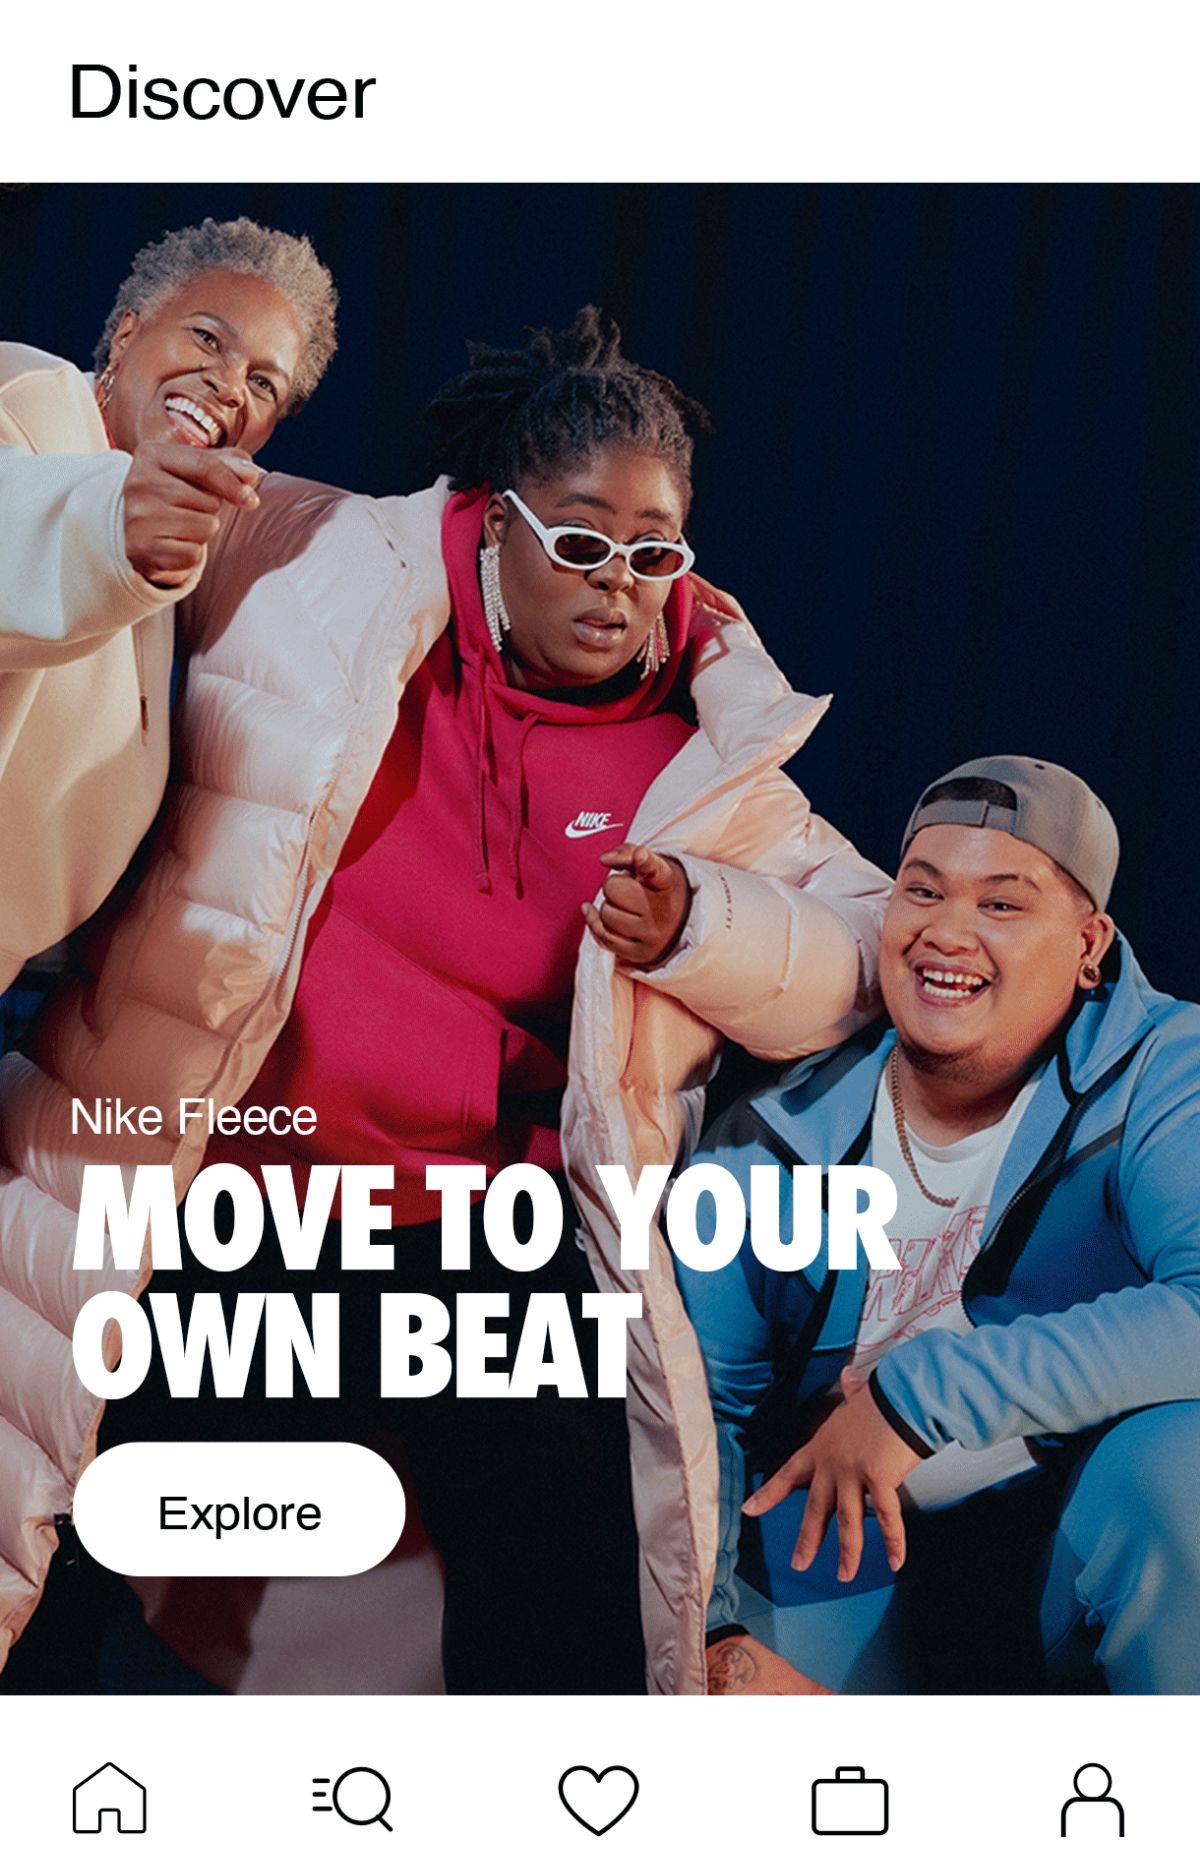 Discover Nike Fleece Move to your own beat.